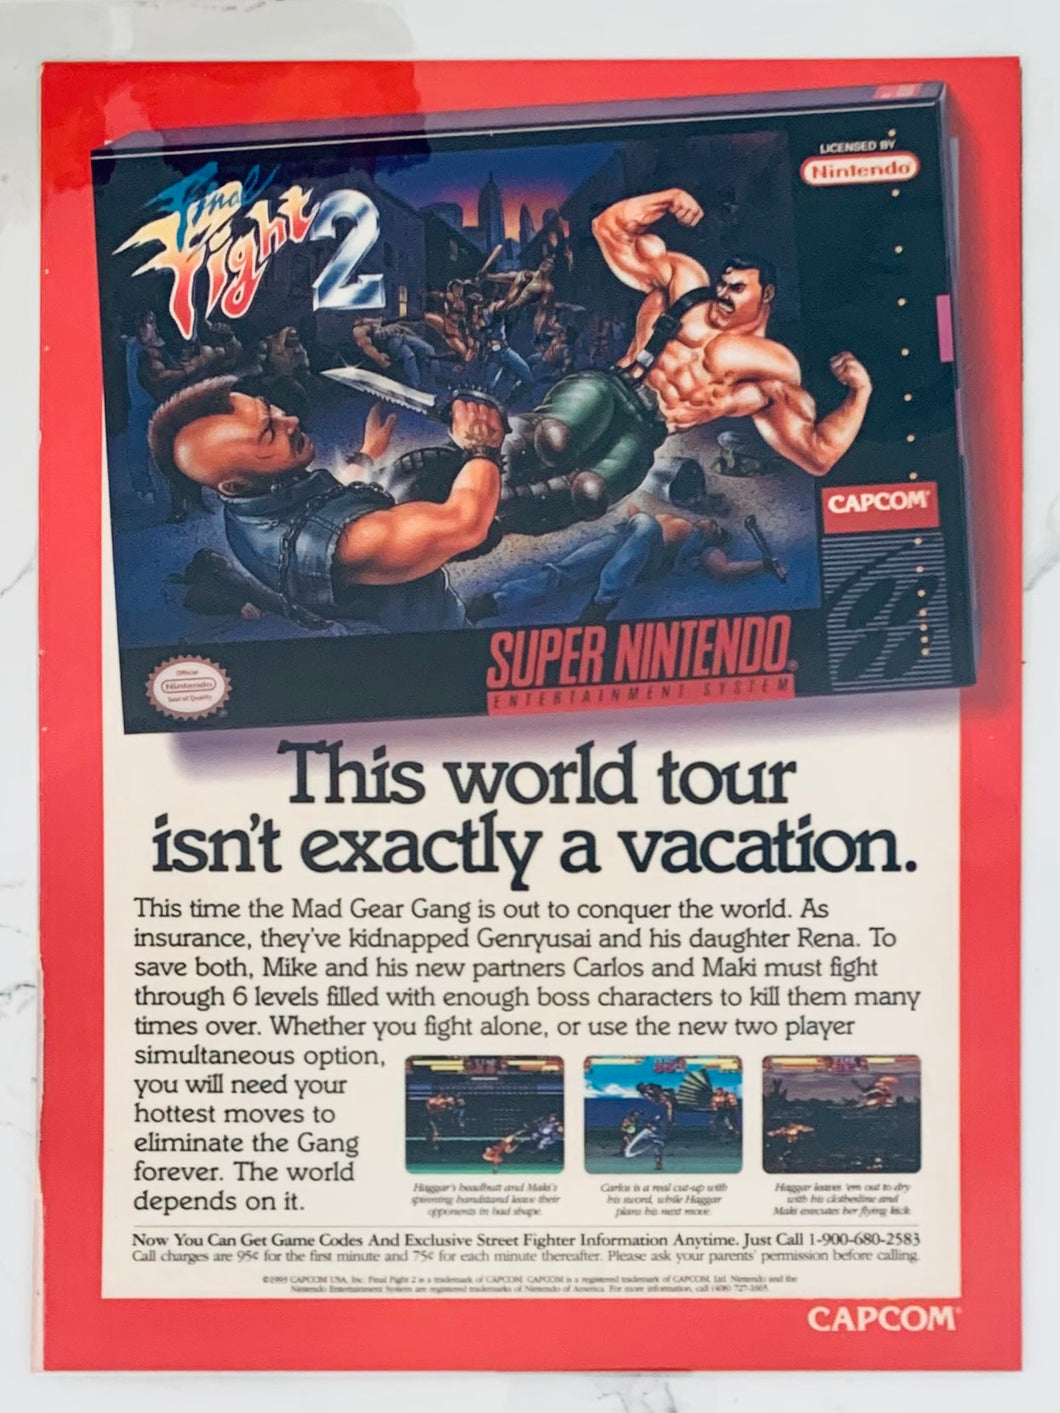 Final Fight II - SNES - Original Vintage Advertisement - Print Ads - Laminated A4 Poster